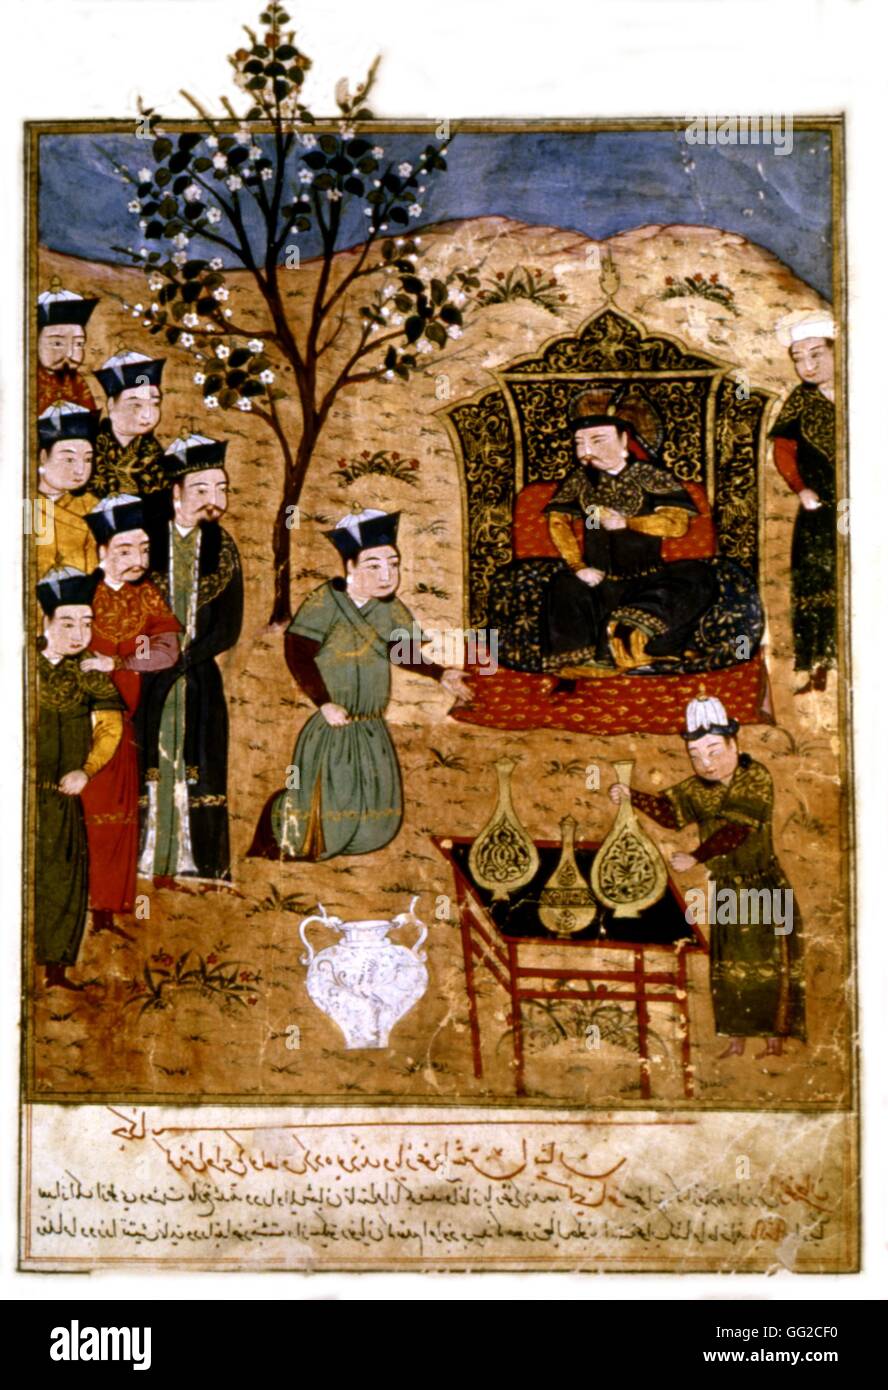 Persian manuscript illustrated with 106 paintings: 'Jami'al Tawarikh' by Rachid ad-Dîn (History of the Mongols). Kaikhatou Khan, brother of the Mongol sovereign of Persia, courts dissidents after the death of his brother. Persian school 14th century Stock Photo